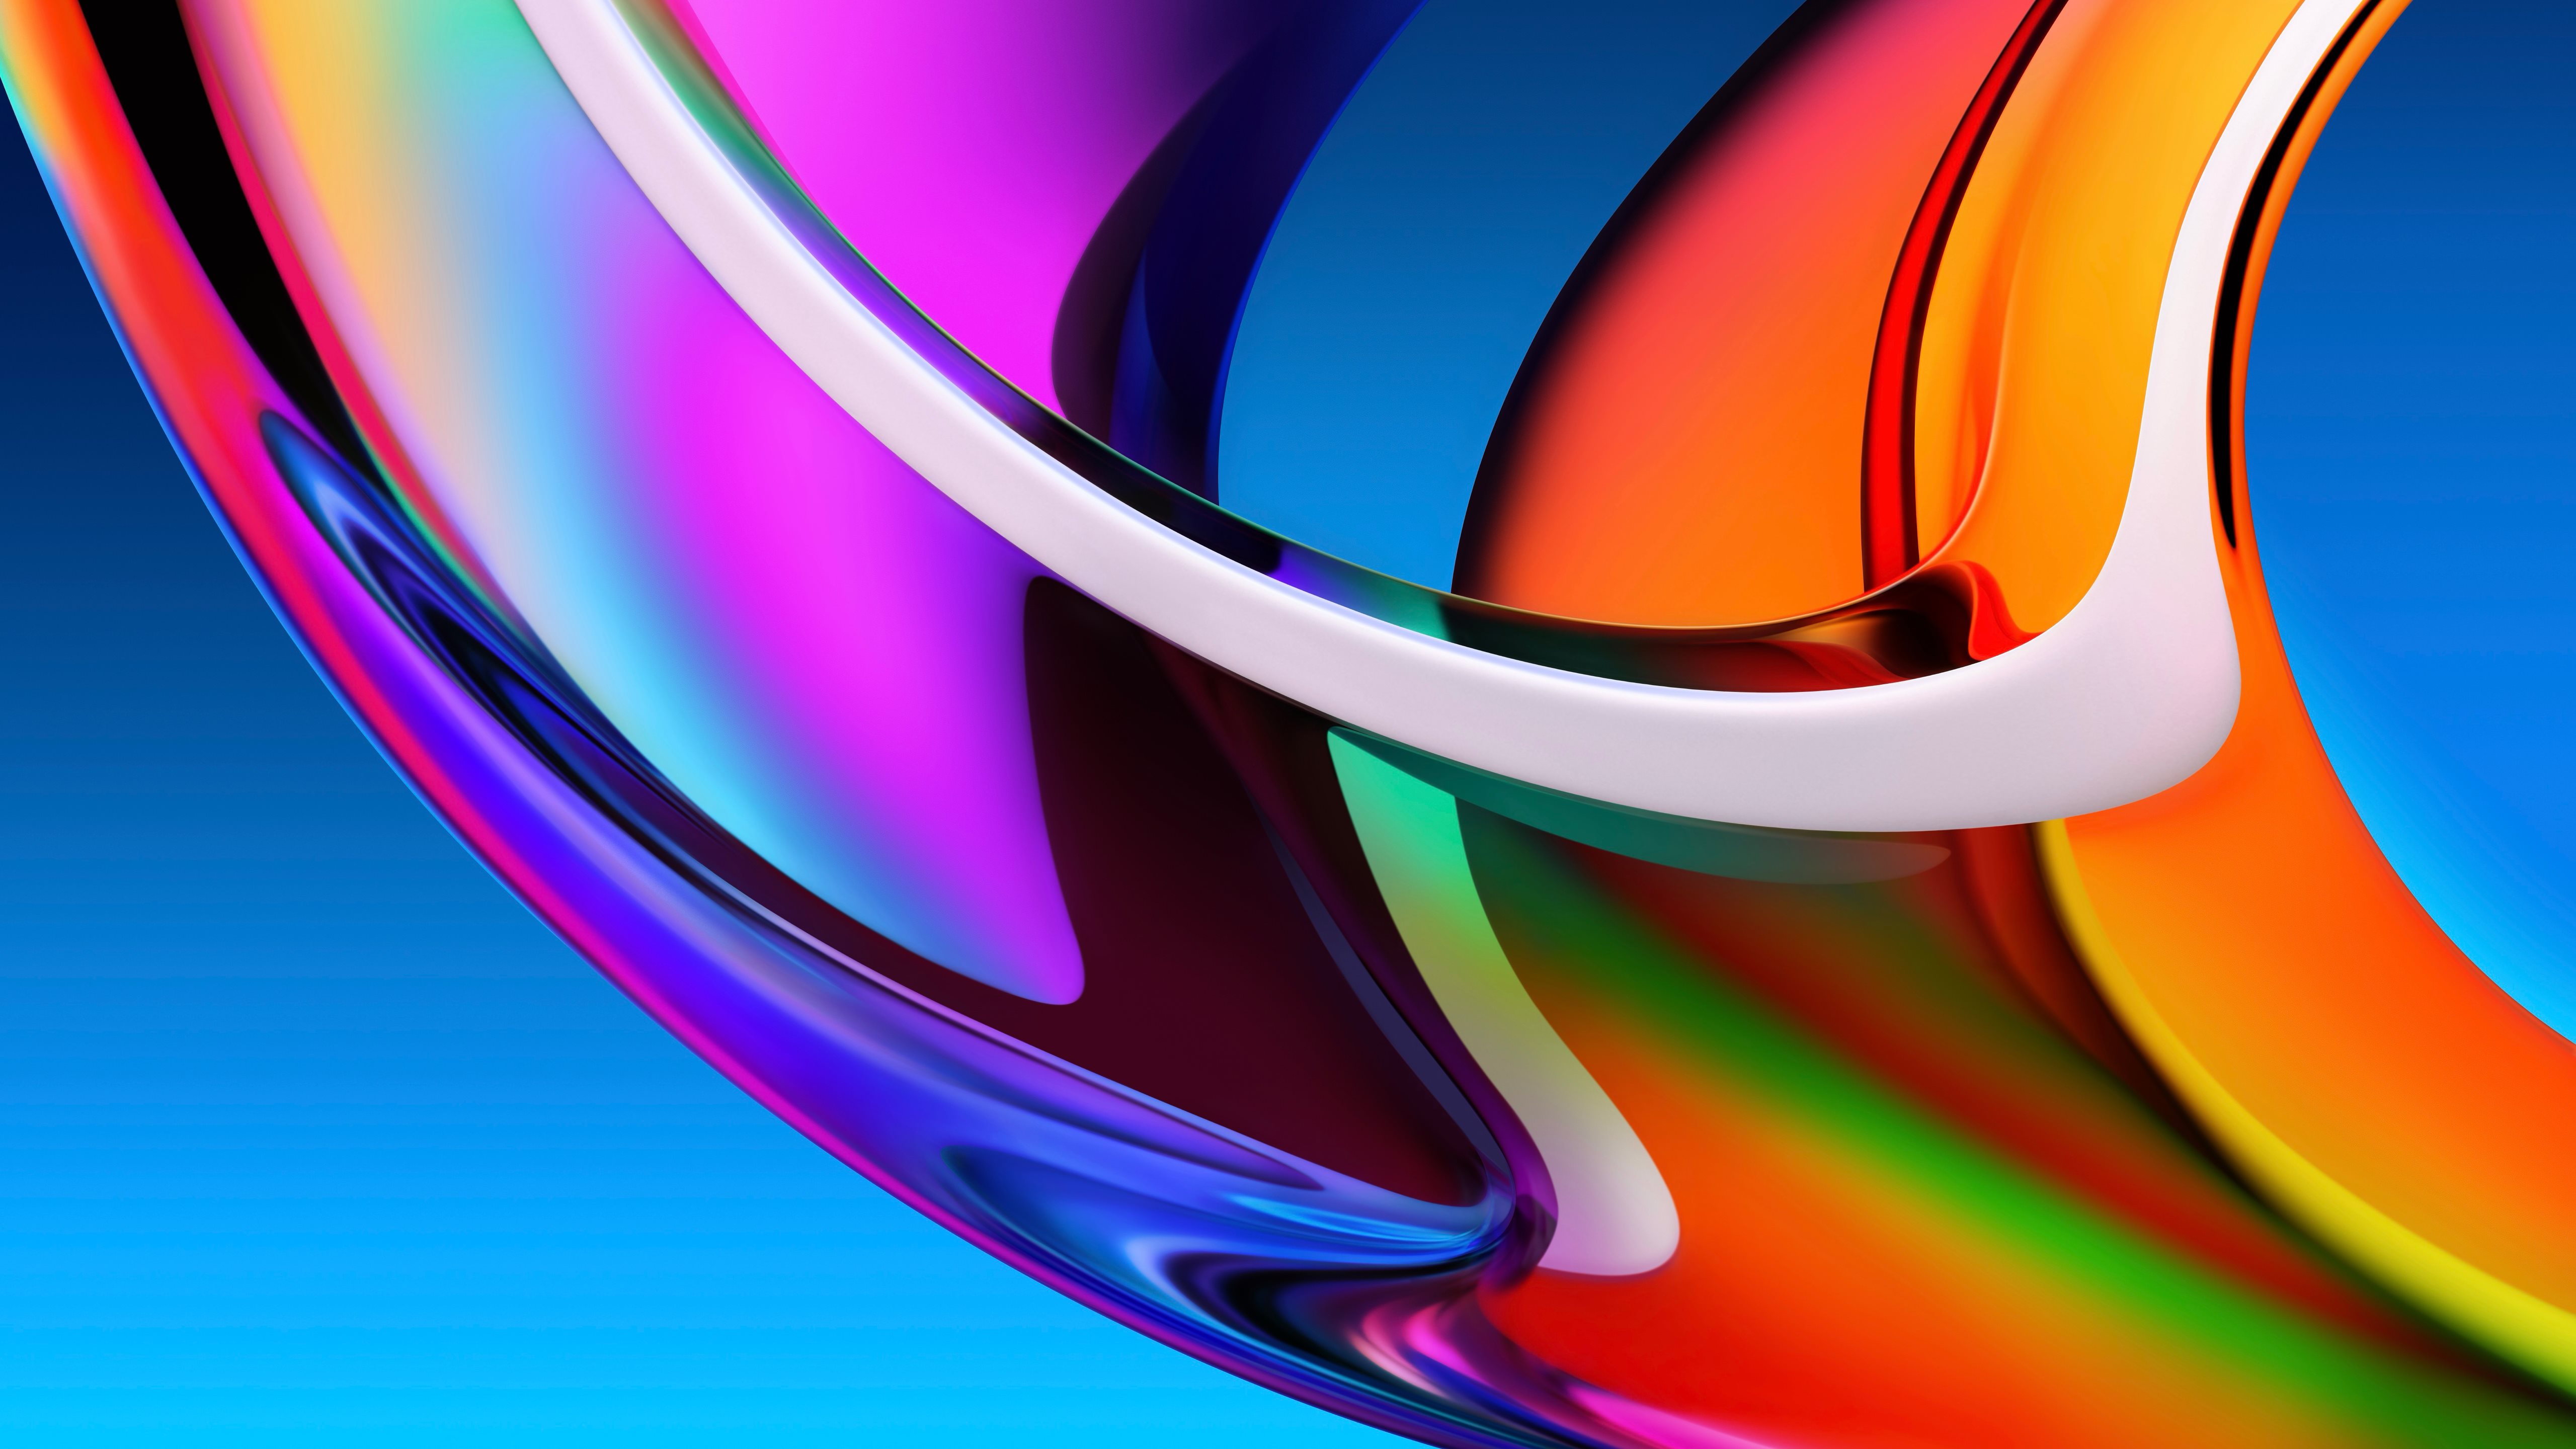 New 2020 iMac wallpapers for desktop and iPhone